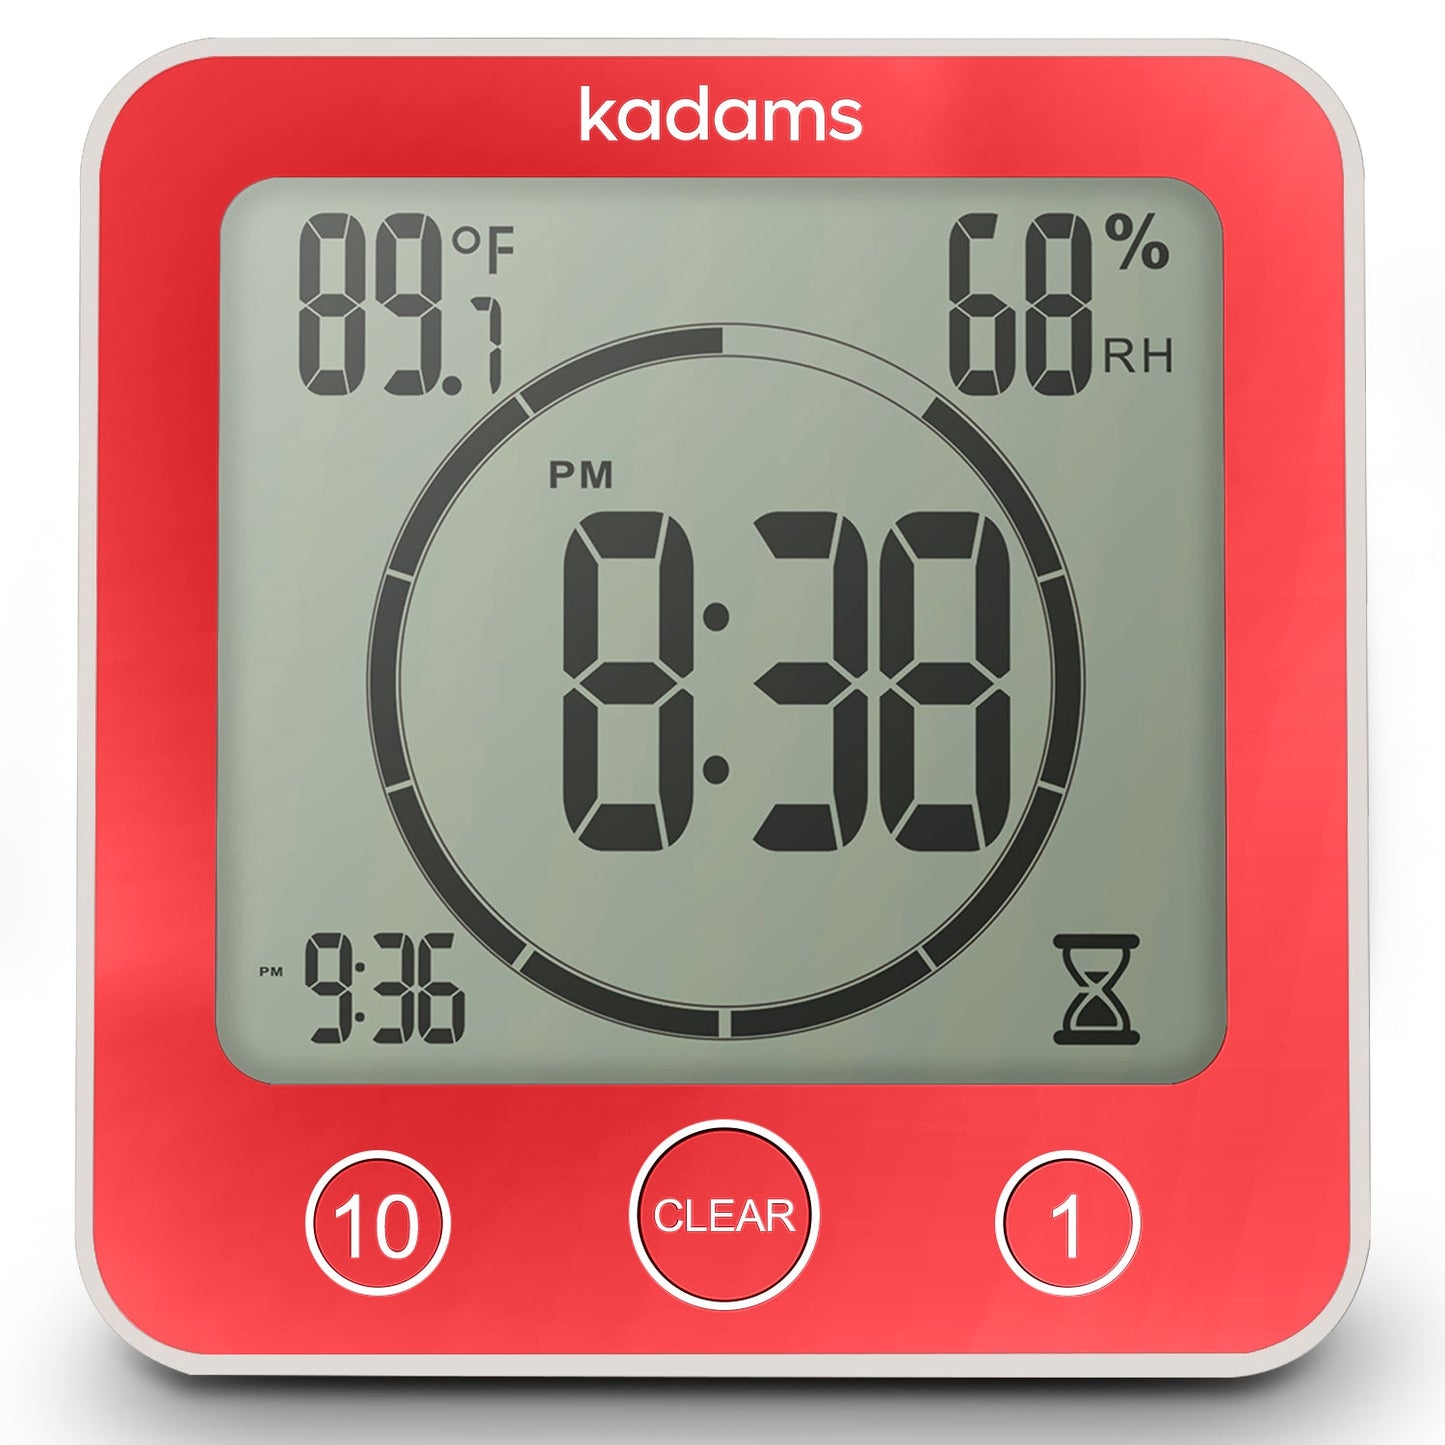 KADAMS Digital Bathroom Shower Kitchen Clock Timer with Alarm, Waterproof for Water Splashes, Visual Countdown Timer, Time Management Tool, Indoor Temperature Humidity, Suction Cup, Hole Stand - Red